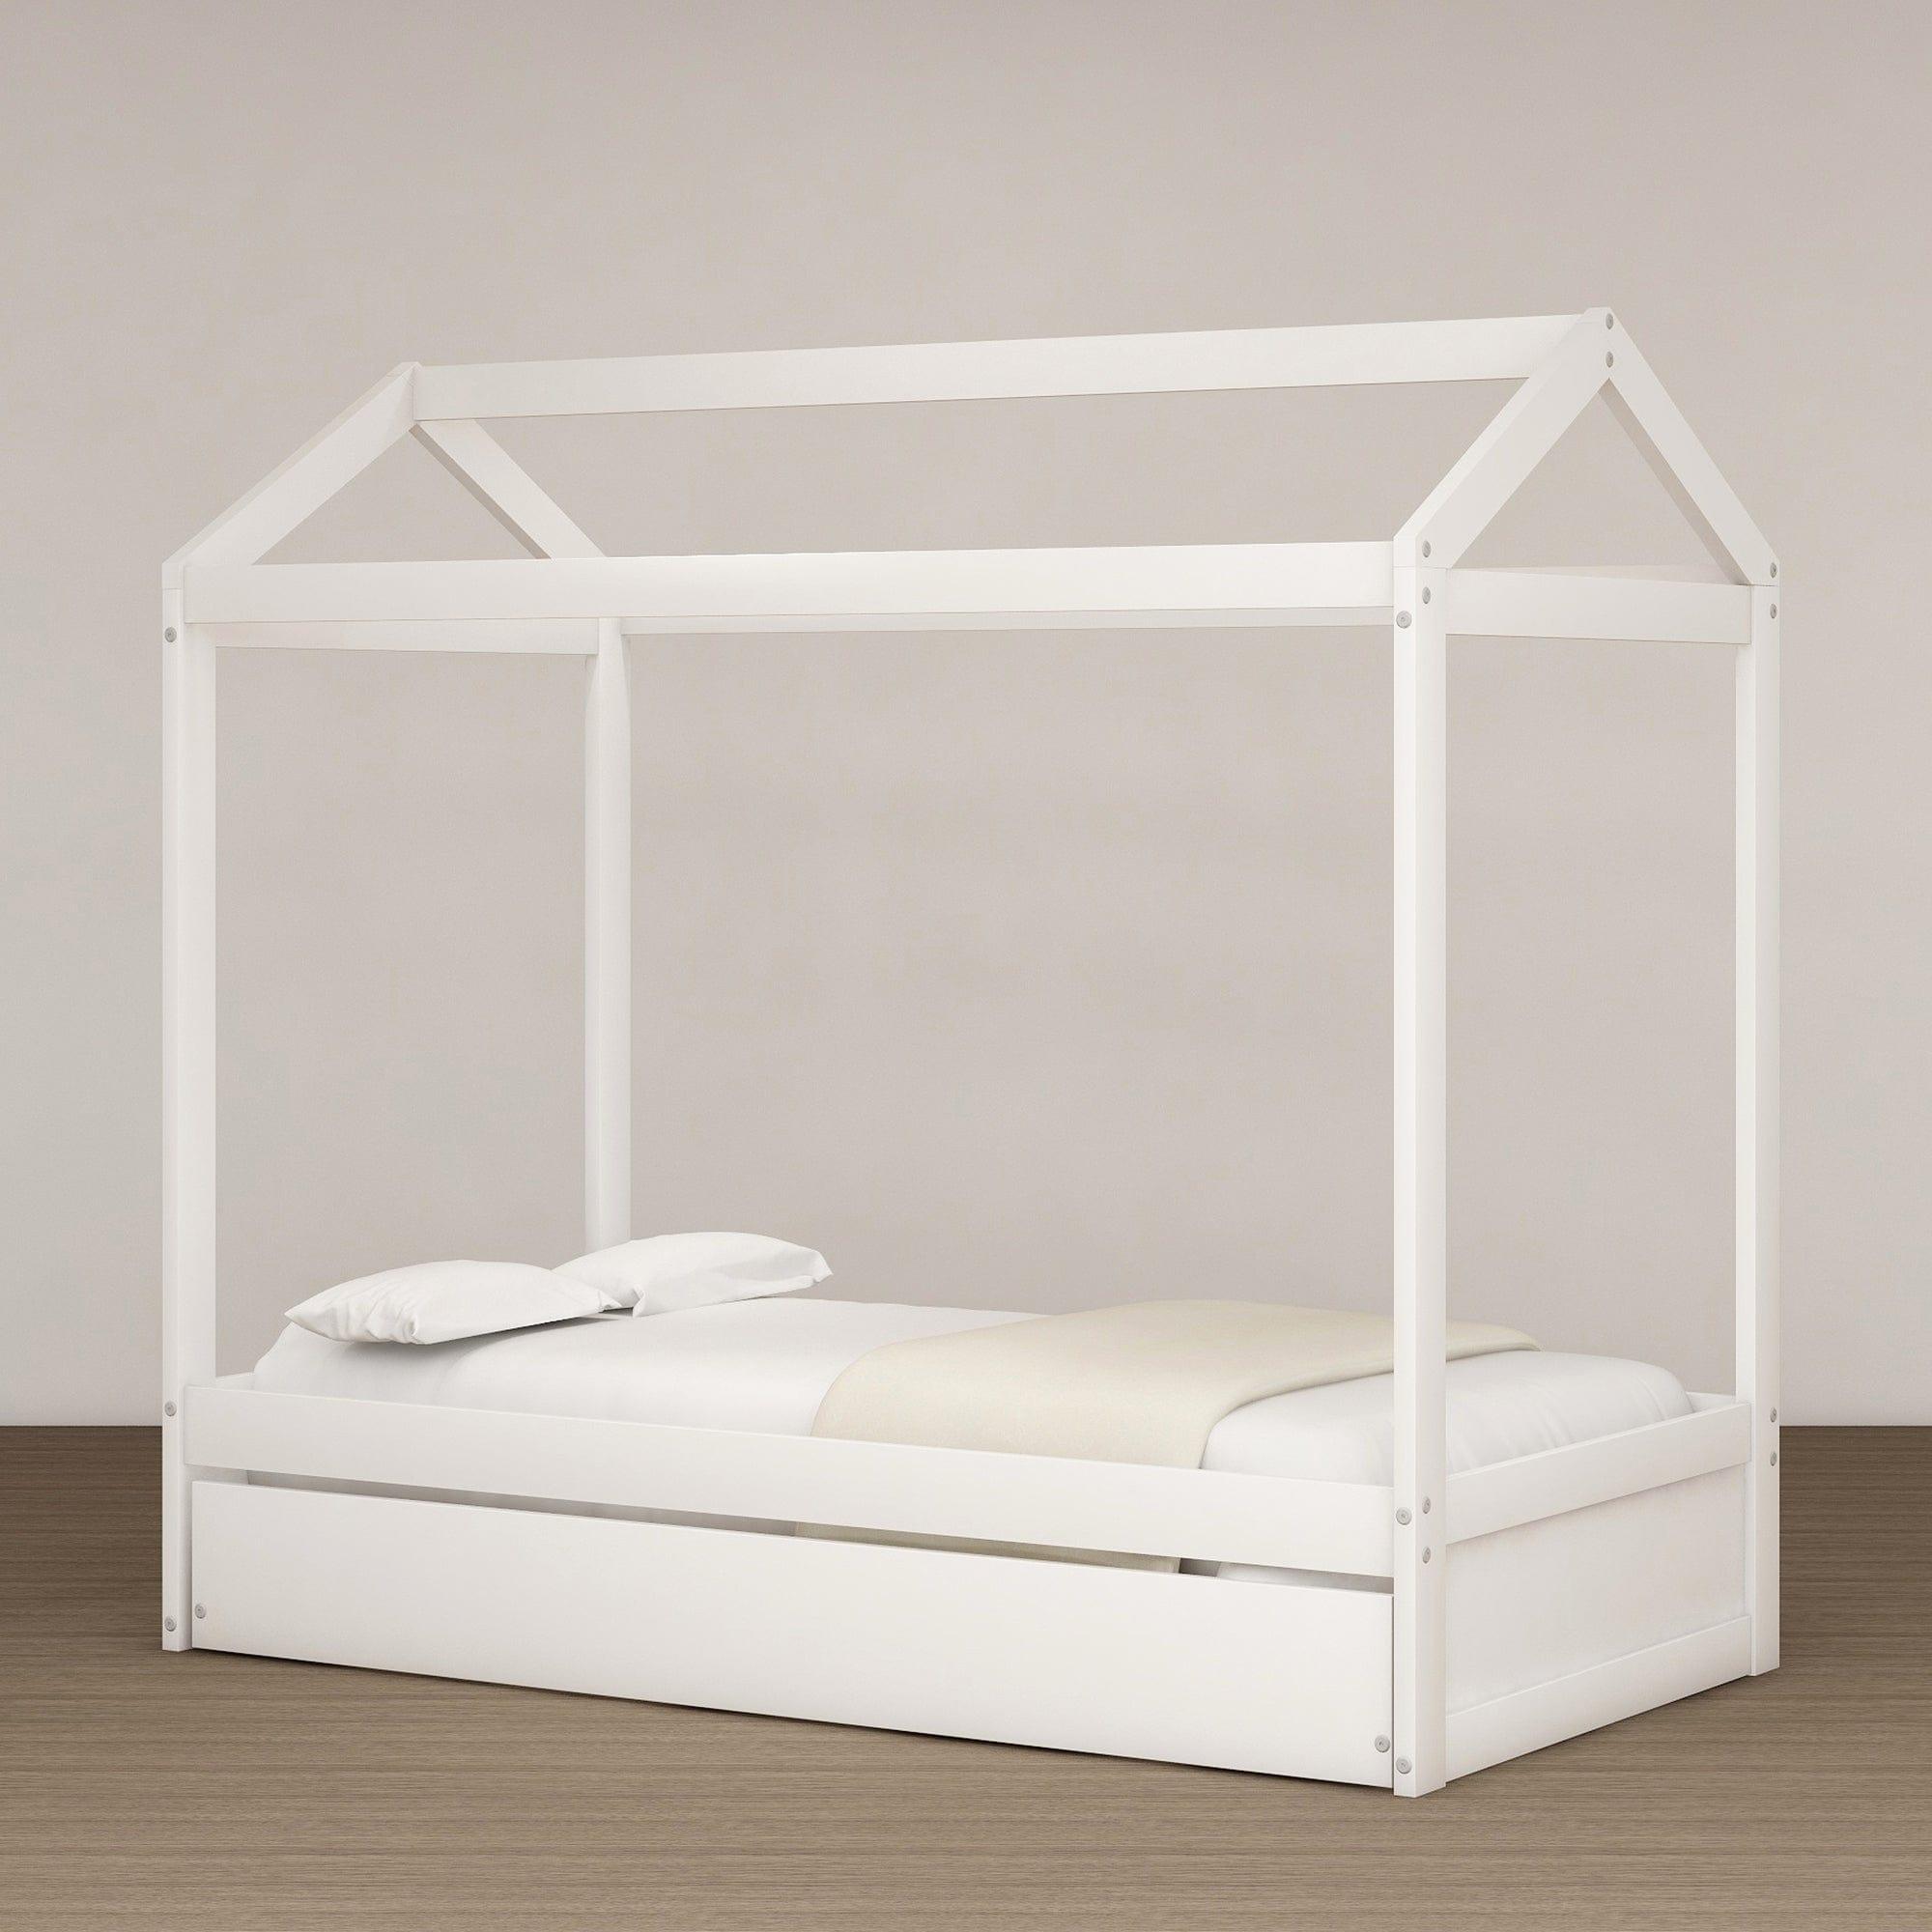 Shop House Bed with Trundle, can be Decorated,White(Old SKU:SM000103AAK) Mademoiselle Home Decor